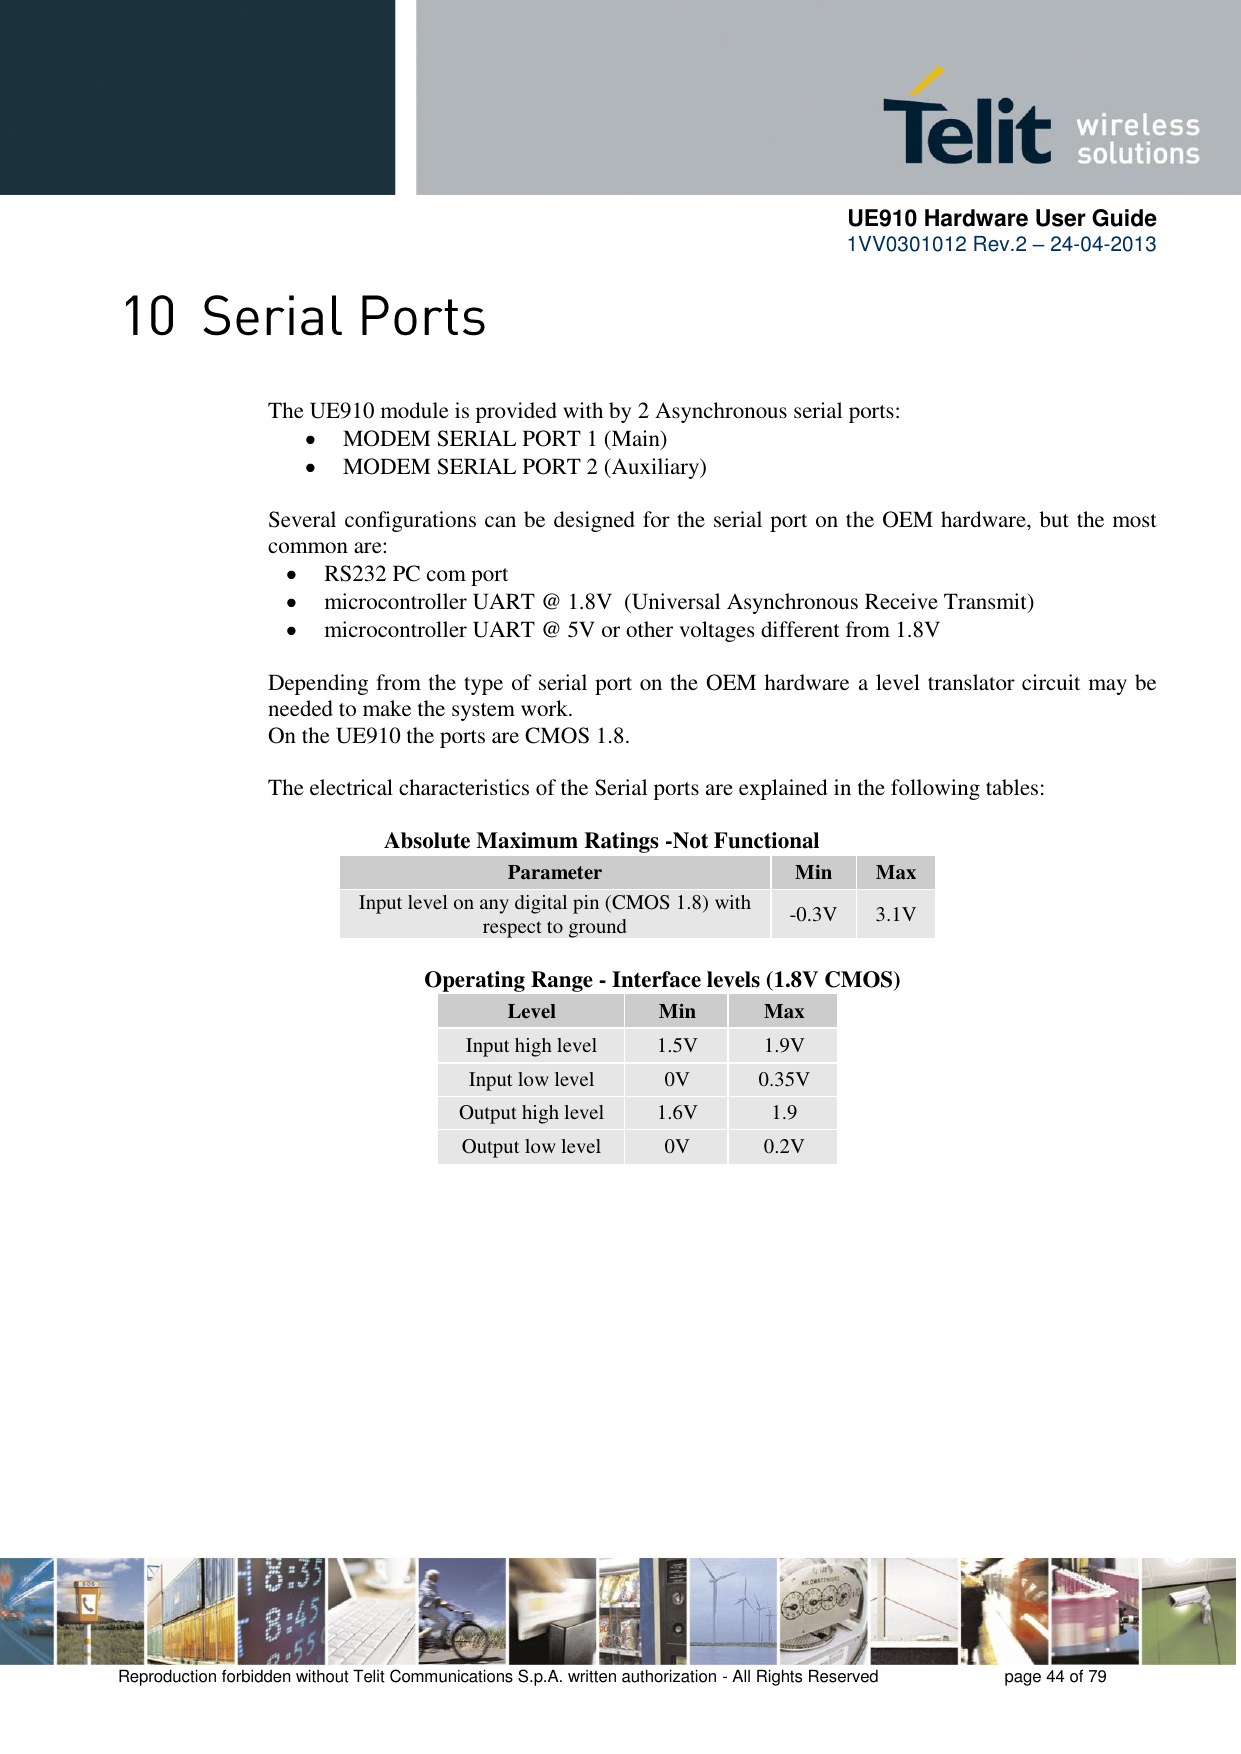      UE910 Hardware User Guide  1VV0301012 Rev.2 – 24-04-2013    Reproduction forbidden without Telit Communications S.p.A. written authorization - All Rights Reserved    page 44 of 79   The UE910 module is provided with by 2 Asynchronous serial ports:  MODEM SERIAL PORT 1 (Main)  MODEM SERIAL PORT 2 (Auxiliary)  Several configurations can be designed for the serial port on the OEM hardware, but the most common are:  RS232 PC com port  microcontroller UART @ 1.8V  (Universal Asynchronous Receive Transmit)   microcontroller UART @ 5V or other voltages different from 1.8V   Depending from the type of serial port on the OEM hardware a level translator circuit may be needed to make the system work.  On the UE910 the ports are CMOS 1.8.  The electrical characteristics of the Serial ports are explained in the following tables:      Absolute Maximum Ratings -Not Functional Parameter Min Max Input level on any digital pin (CMOS 1.8) with respect to ground -0.3V 3.1V              Operating Range - Interface levels (1.8V CMOS) Level Min Max Input high level 1.5V 1.9V Input low level 0V 0.35V Output high level 1.6V 1.9 Output low level 0V 0.2V  